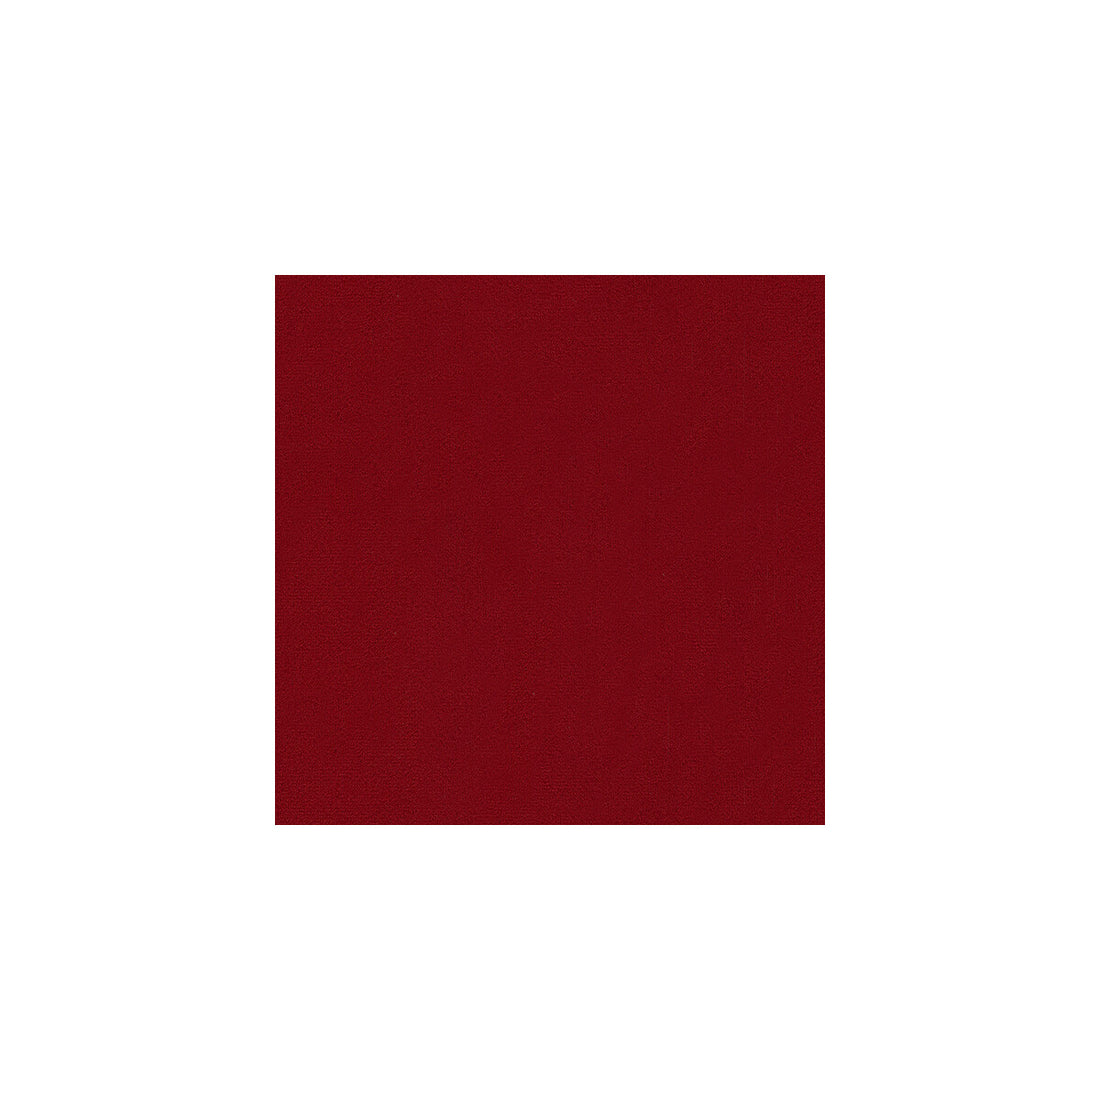 Carmine fabric in merlot color - pattern 32862.909.0 - by Kravet Contract in the Perfect Plains collection